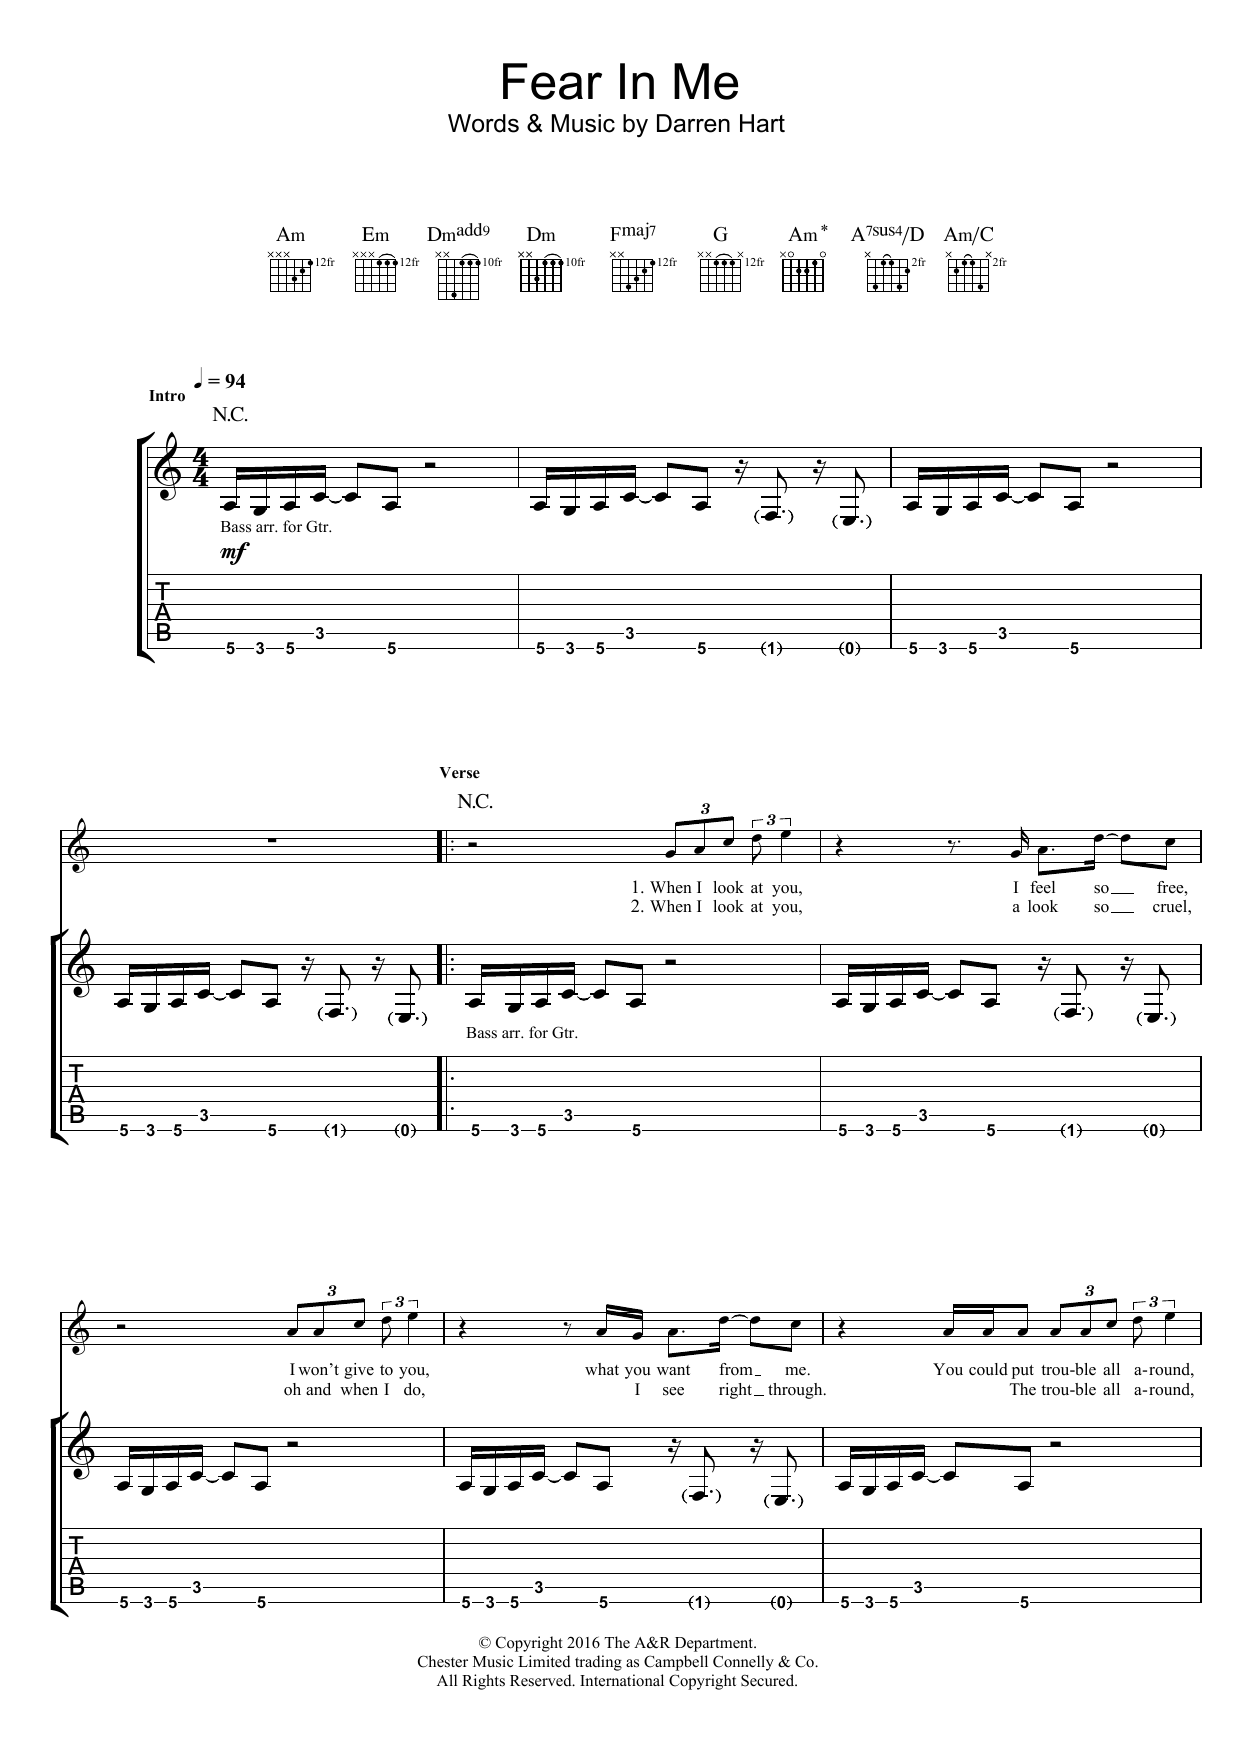 Download Harts Fear In Me Sheet Music